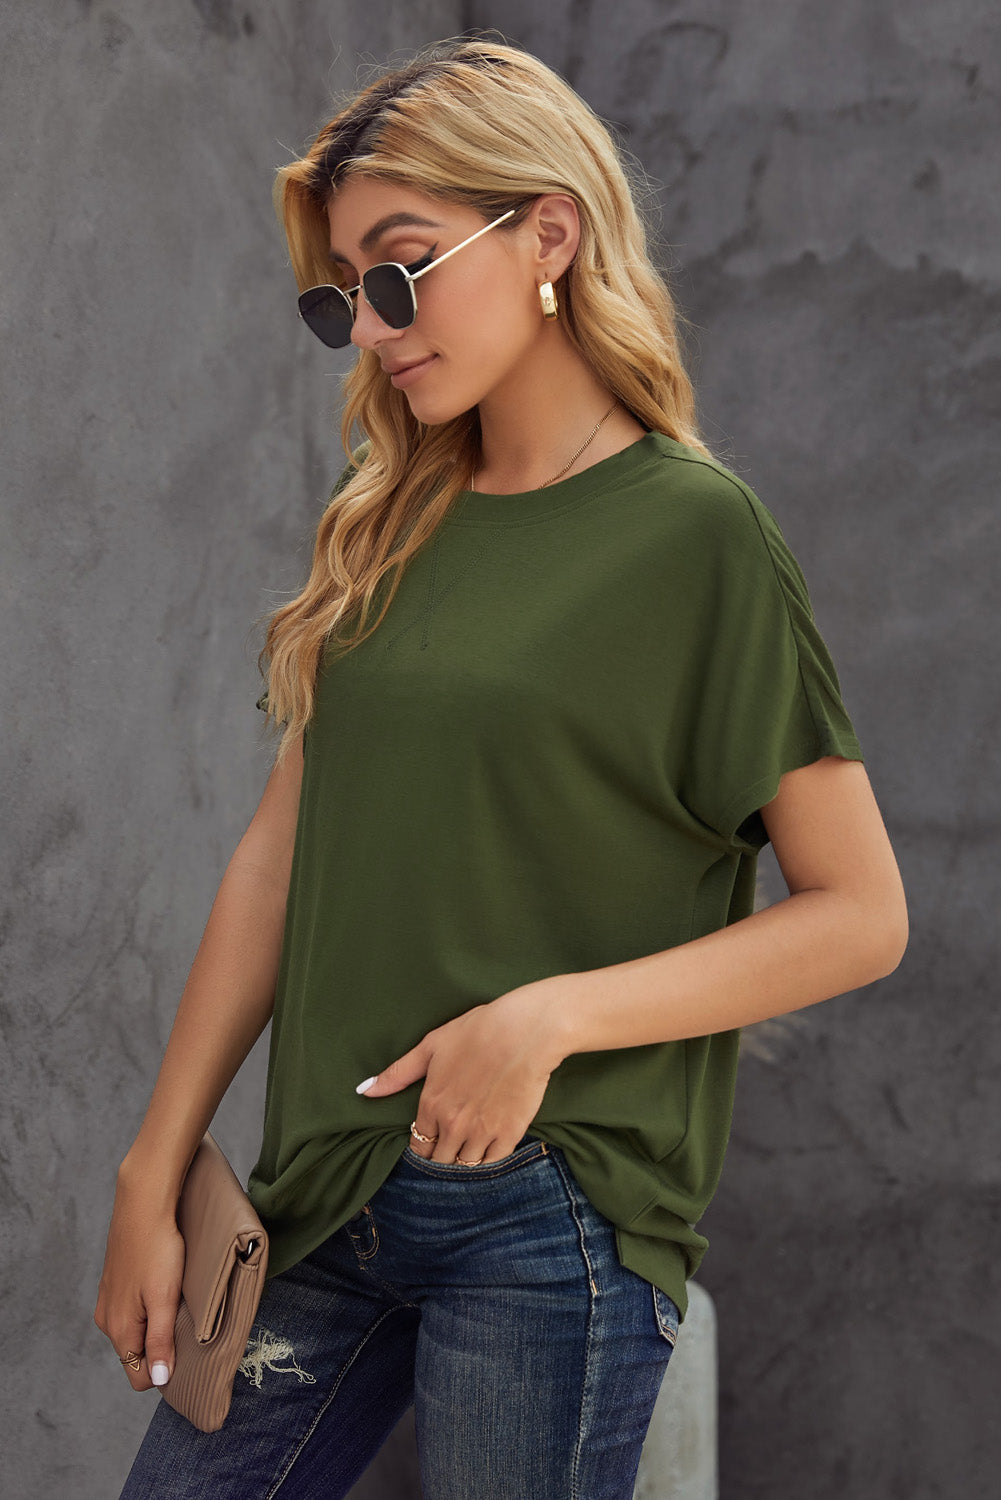 Women's Full Size Round Neck Short Sleeve Solid Color Tee